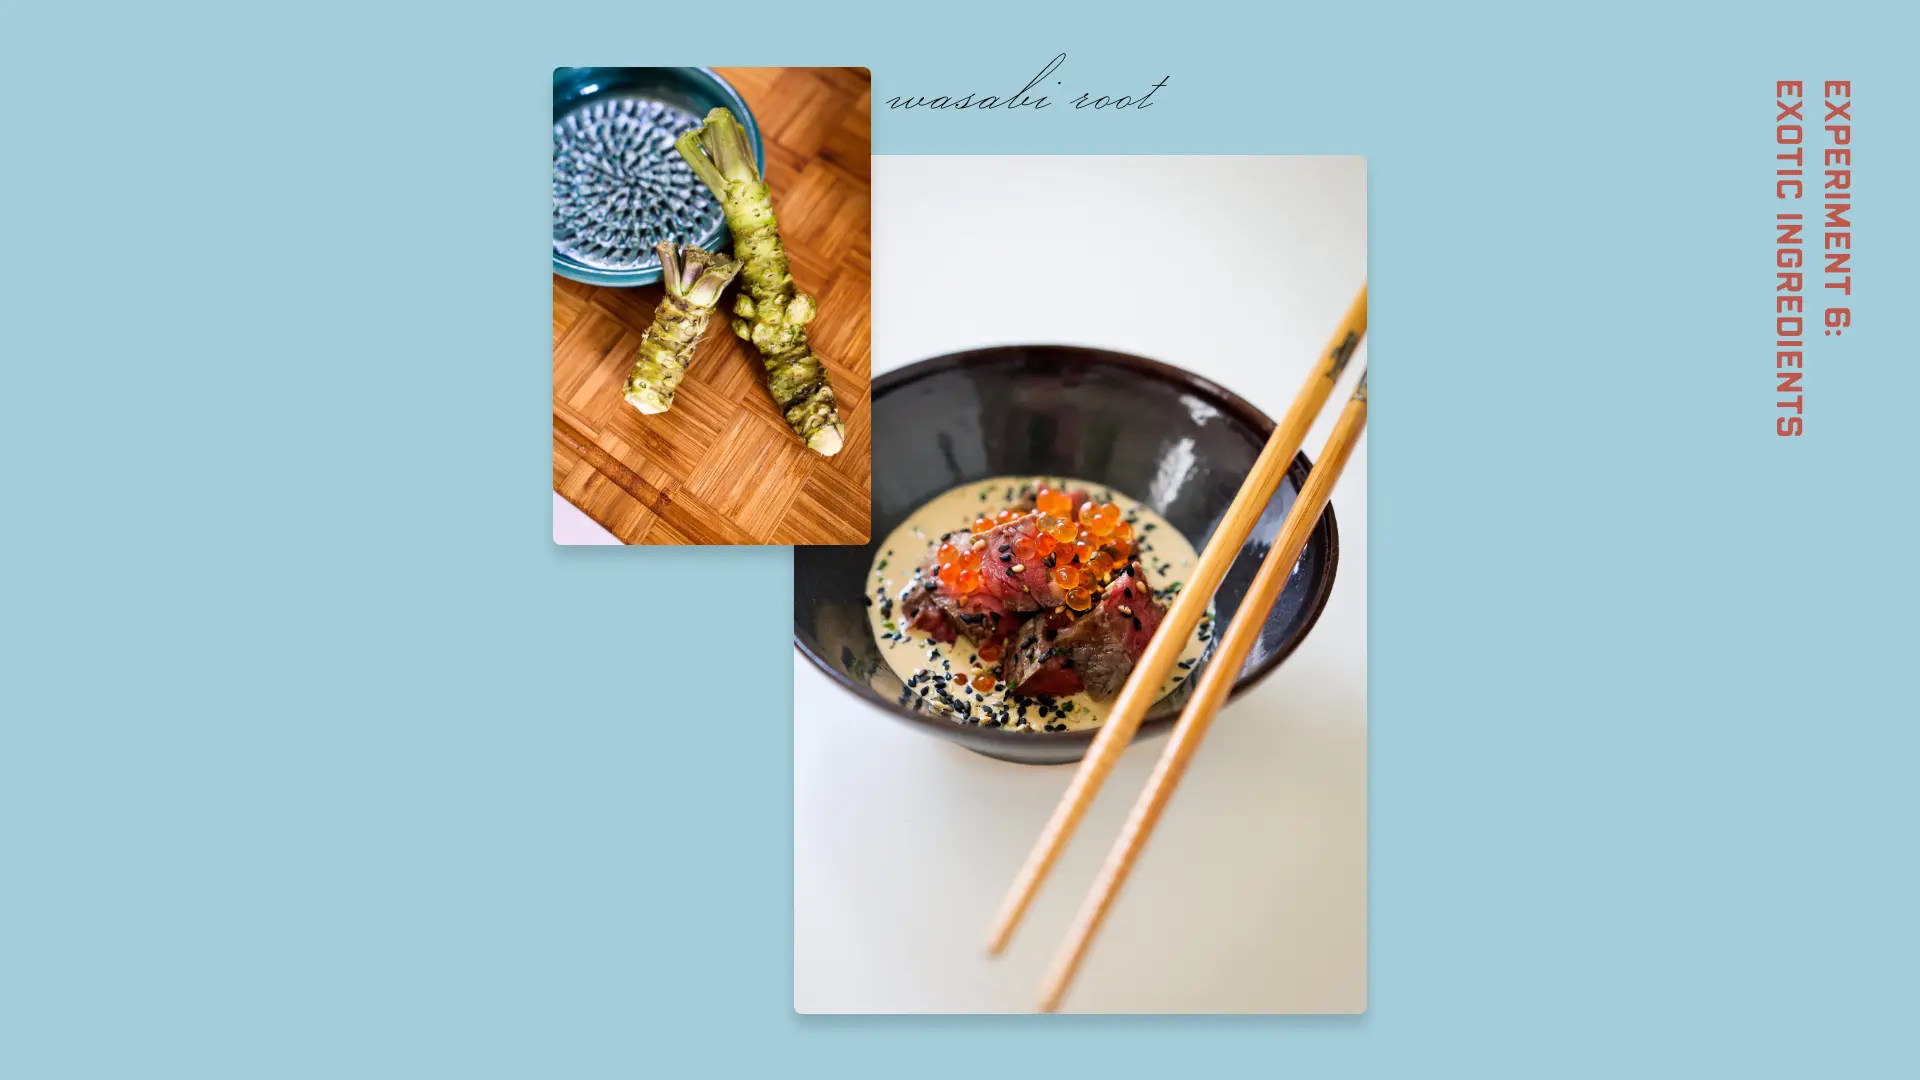 Two photographs of food on a light blue background. From left: Two fresh wasabi roots resting on the edge of a blue-patterned bowl, and sliced beef topped with caviar in a black bowl with a pair of chopsticks resting on the edge.